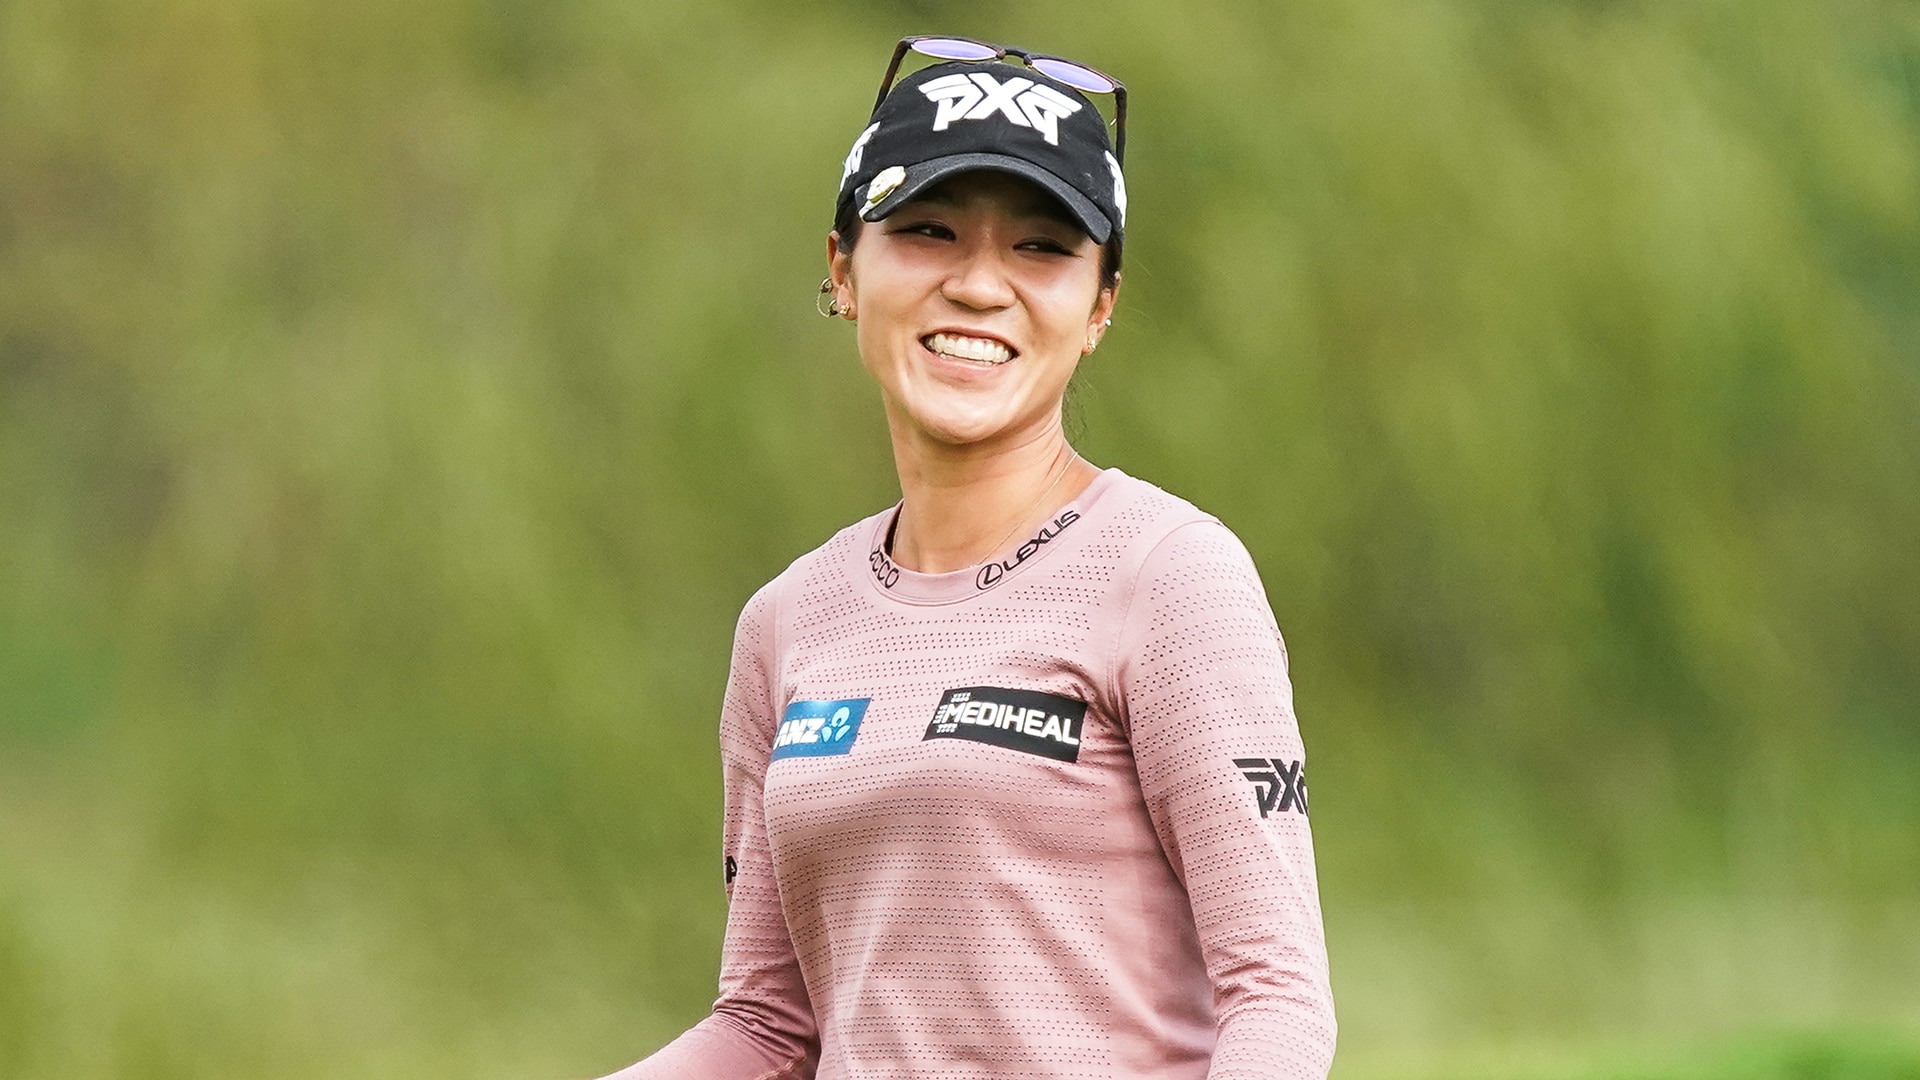 ‘Drive On’ carries double meaning for Lydia Ko who pens message to her 15-year-old self